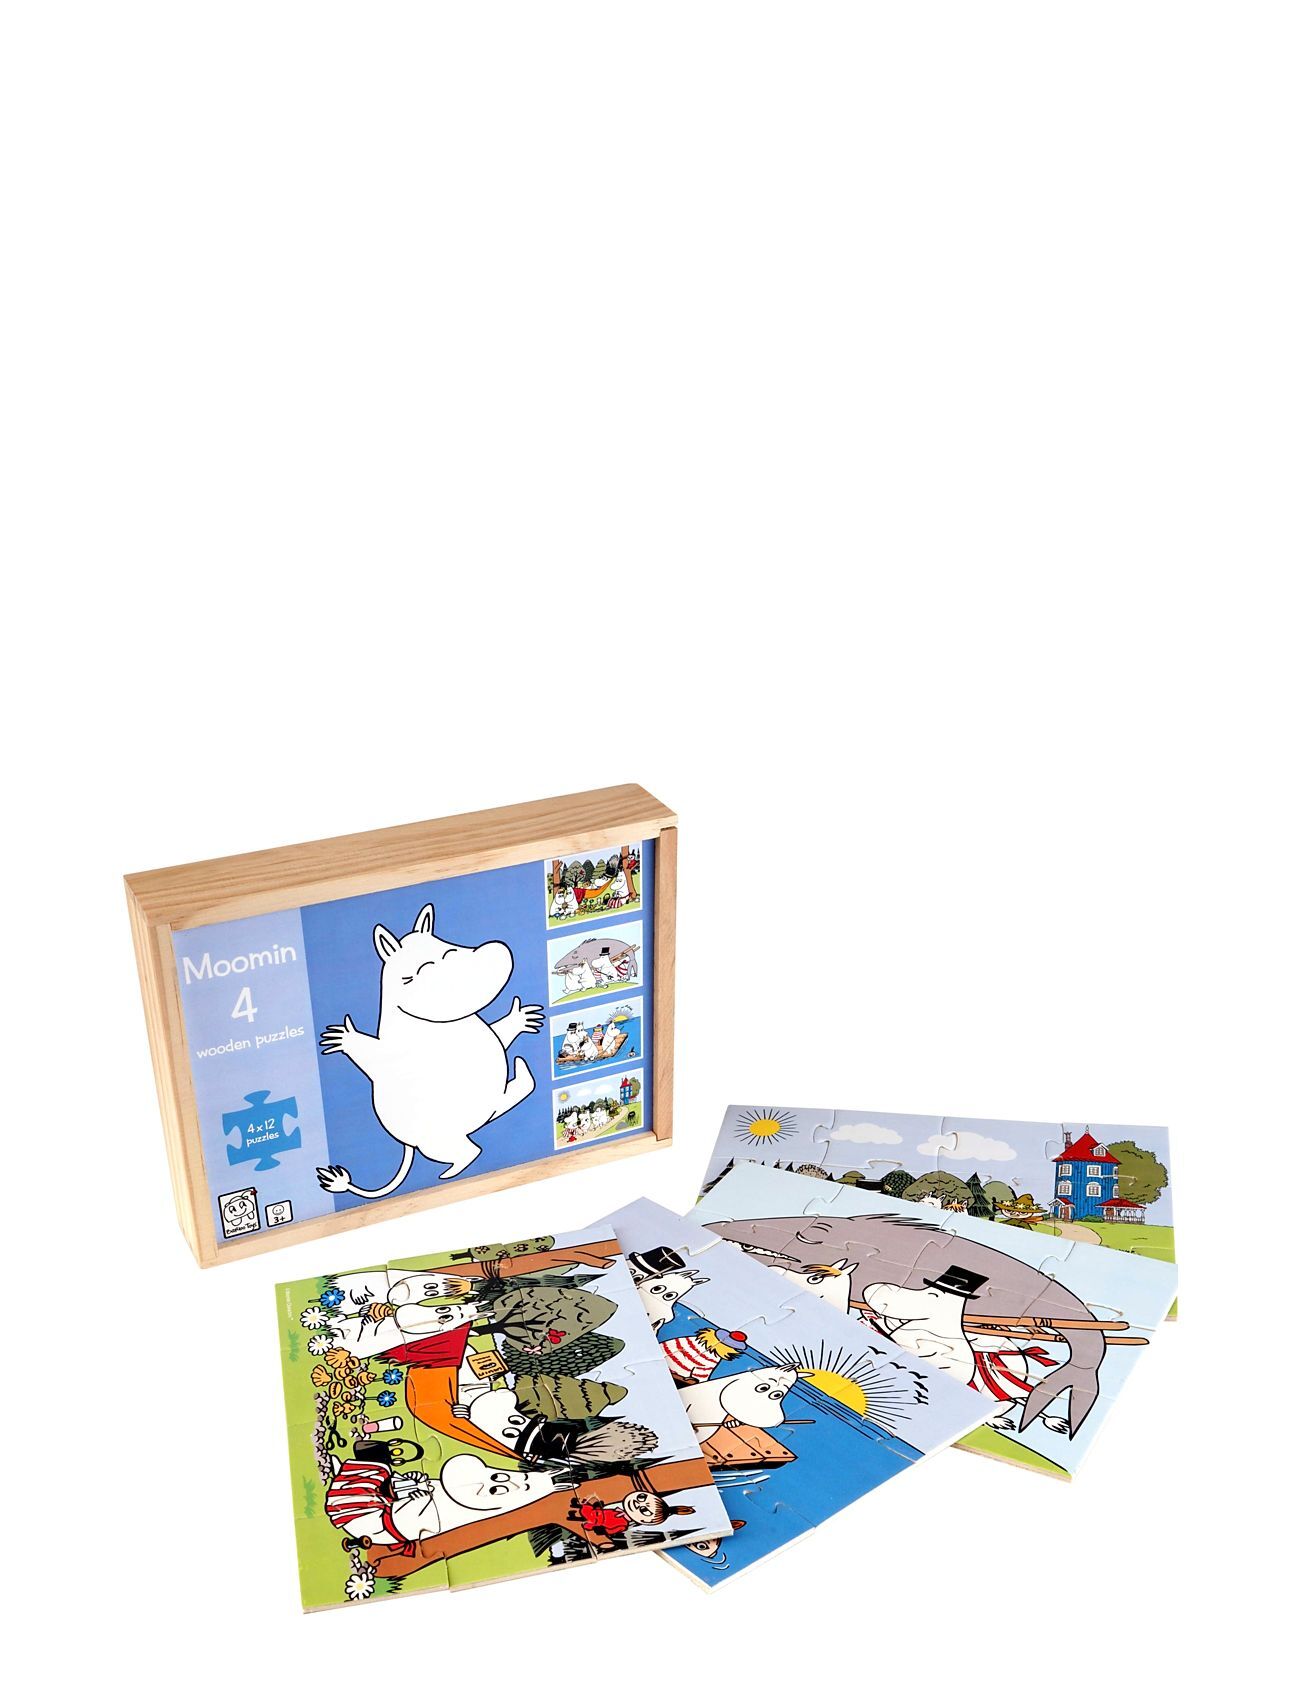 Mumin Moomin 4 Wooden Puzzles In A Box Toys Puzzles And Games Puzzles Multi/mønstret Mumin